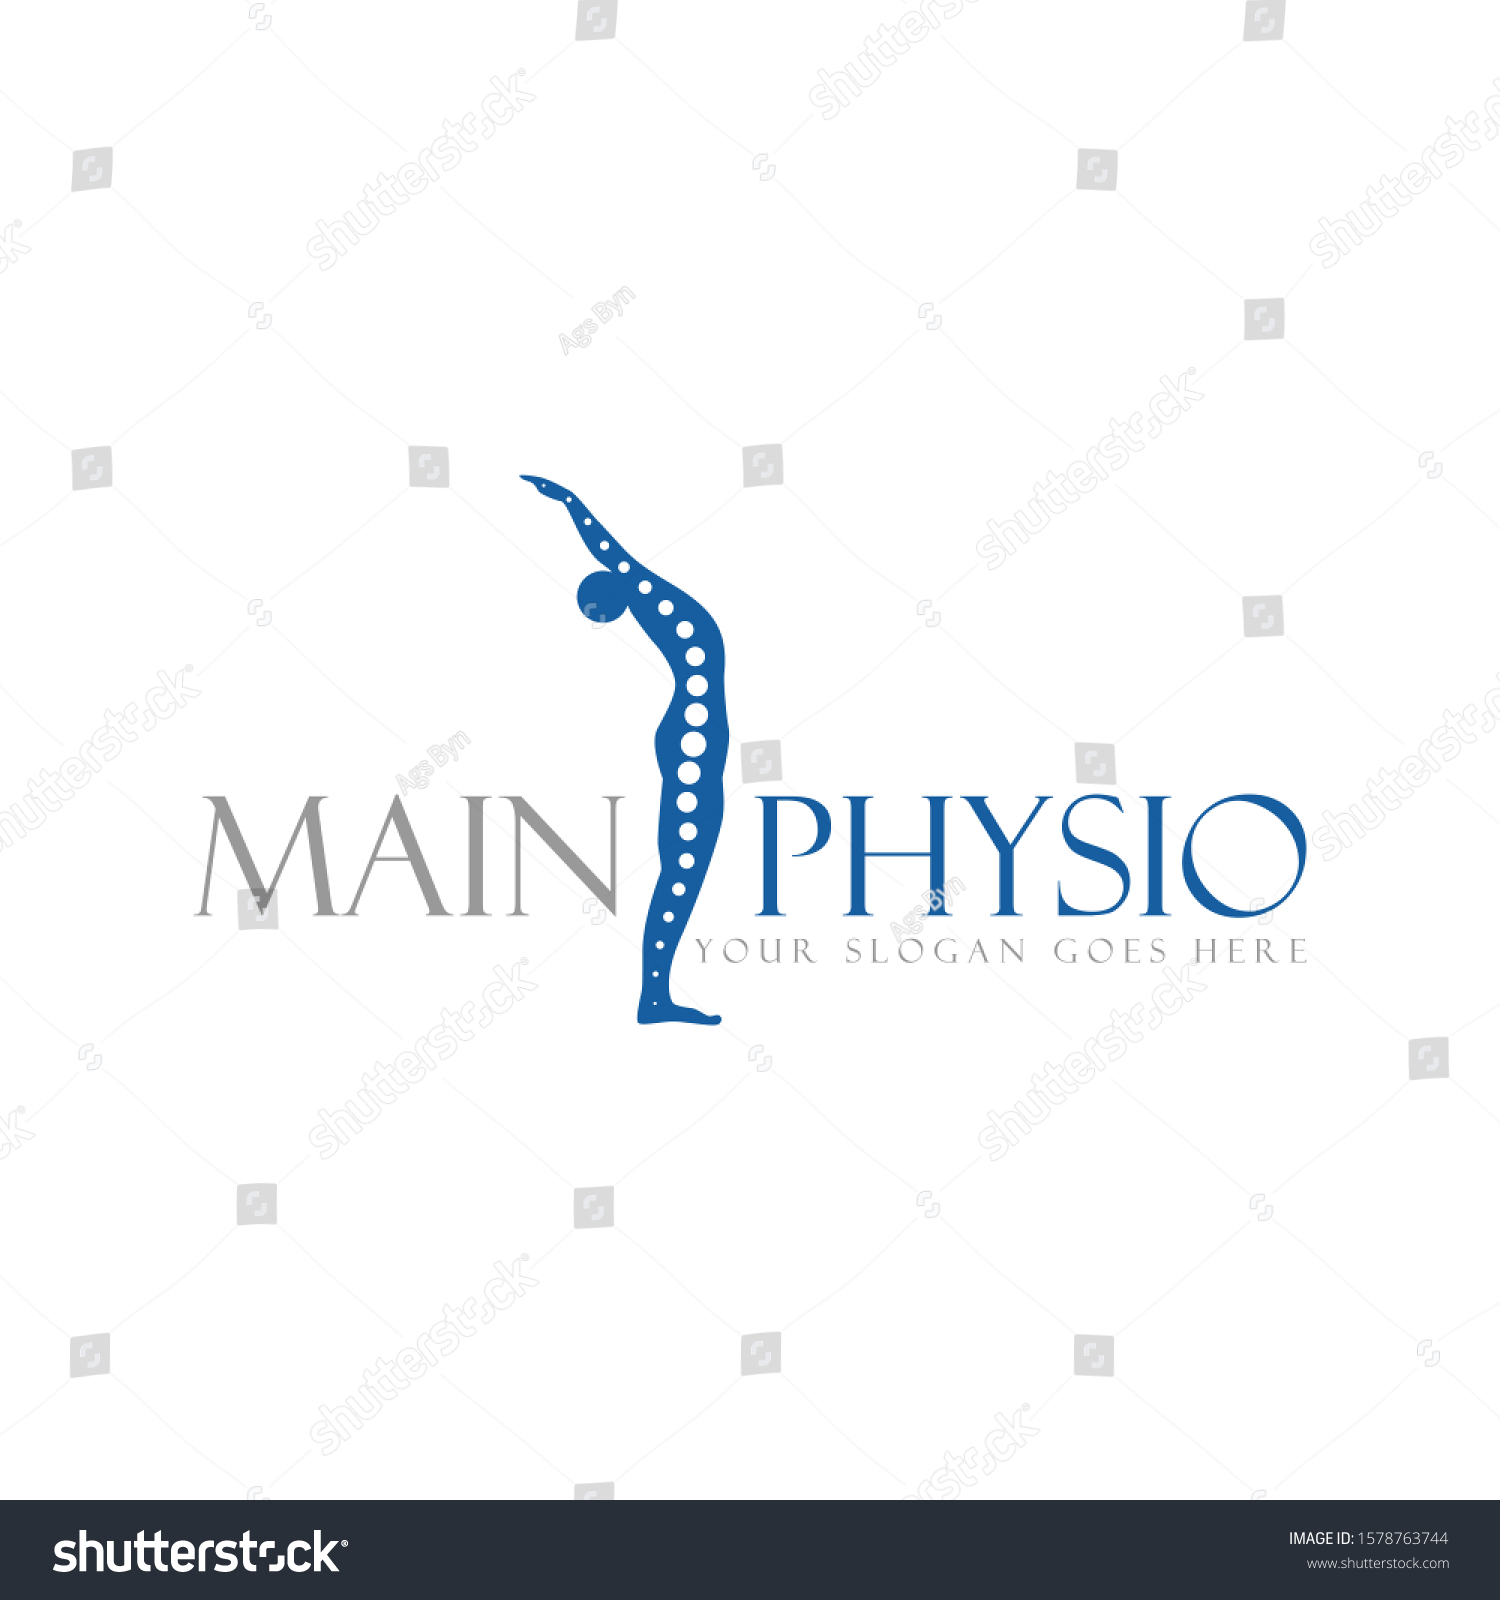 SVG of Simple and unique human body shapes contain skeletal or important points image graphic icon logo design abstract concept vector stock. Can be used as a symbol related to physiotherapy or health svg